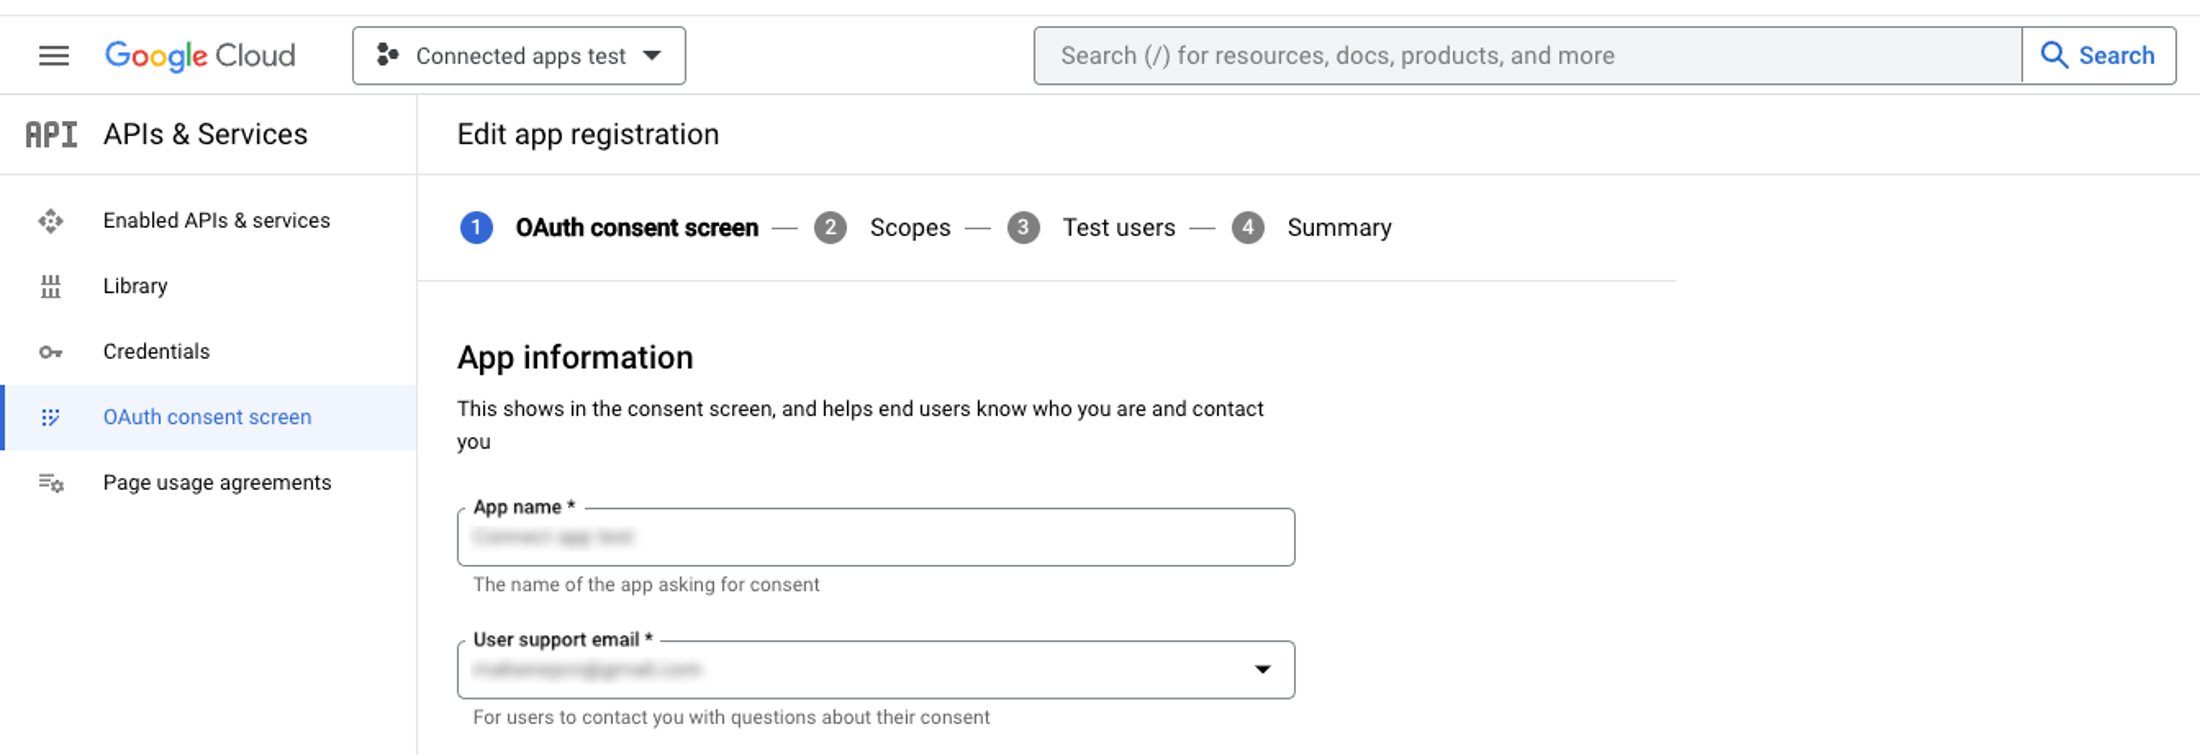 Configuring consent in Google Cloud